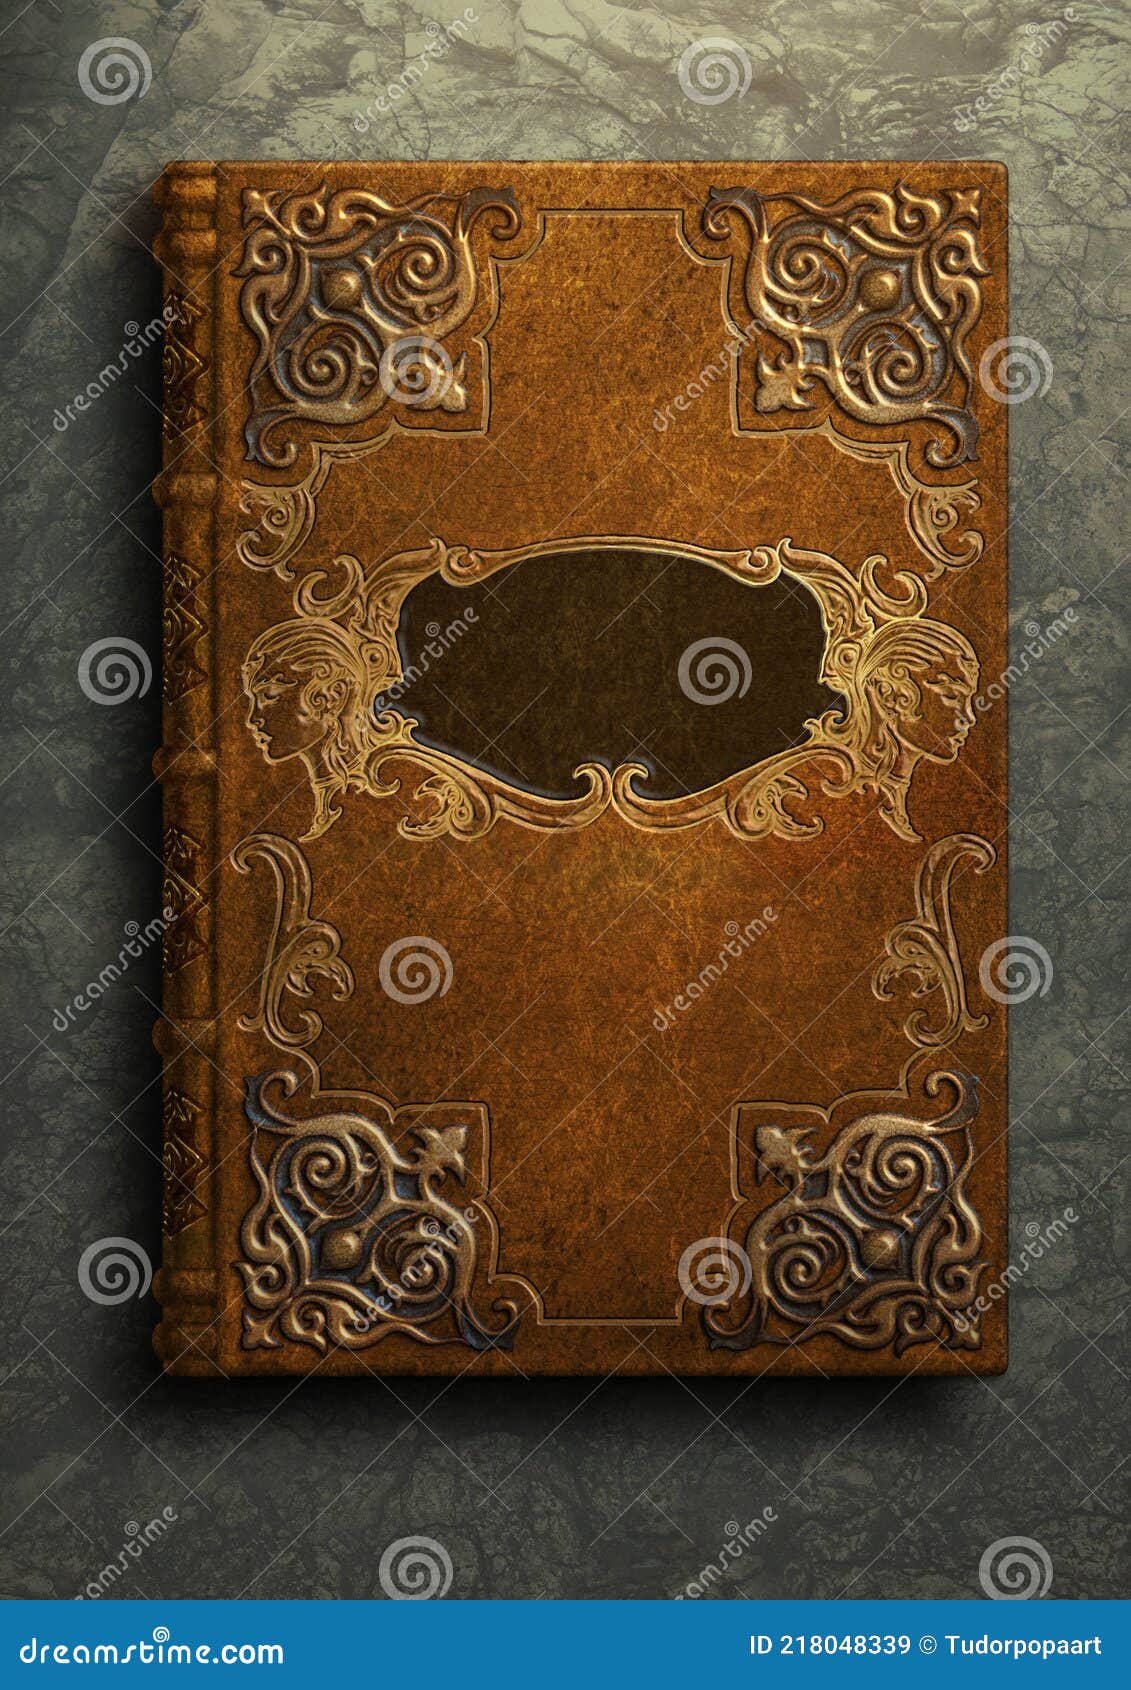 old fantasy book cover with intricate decorations